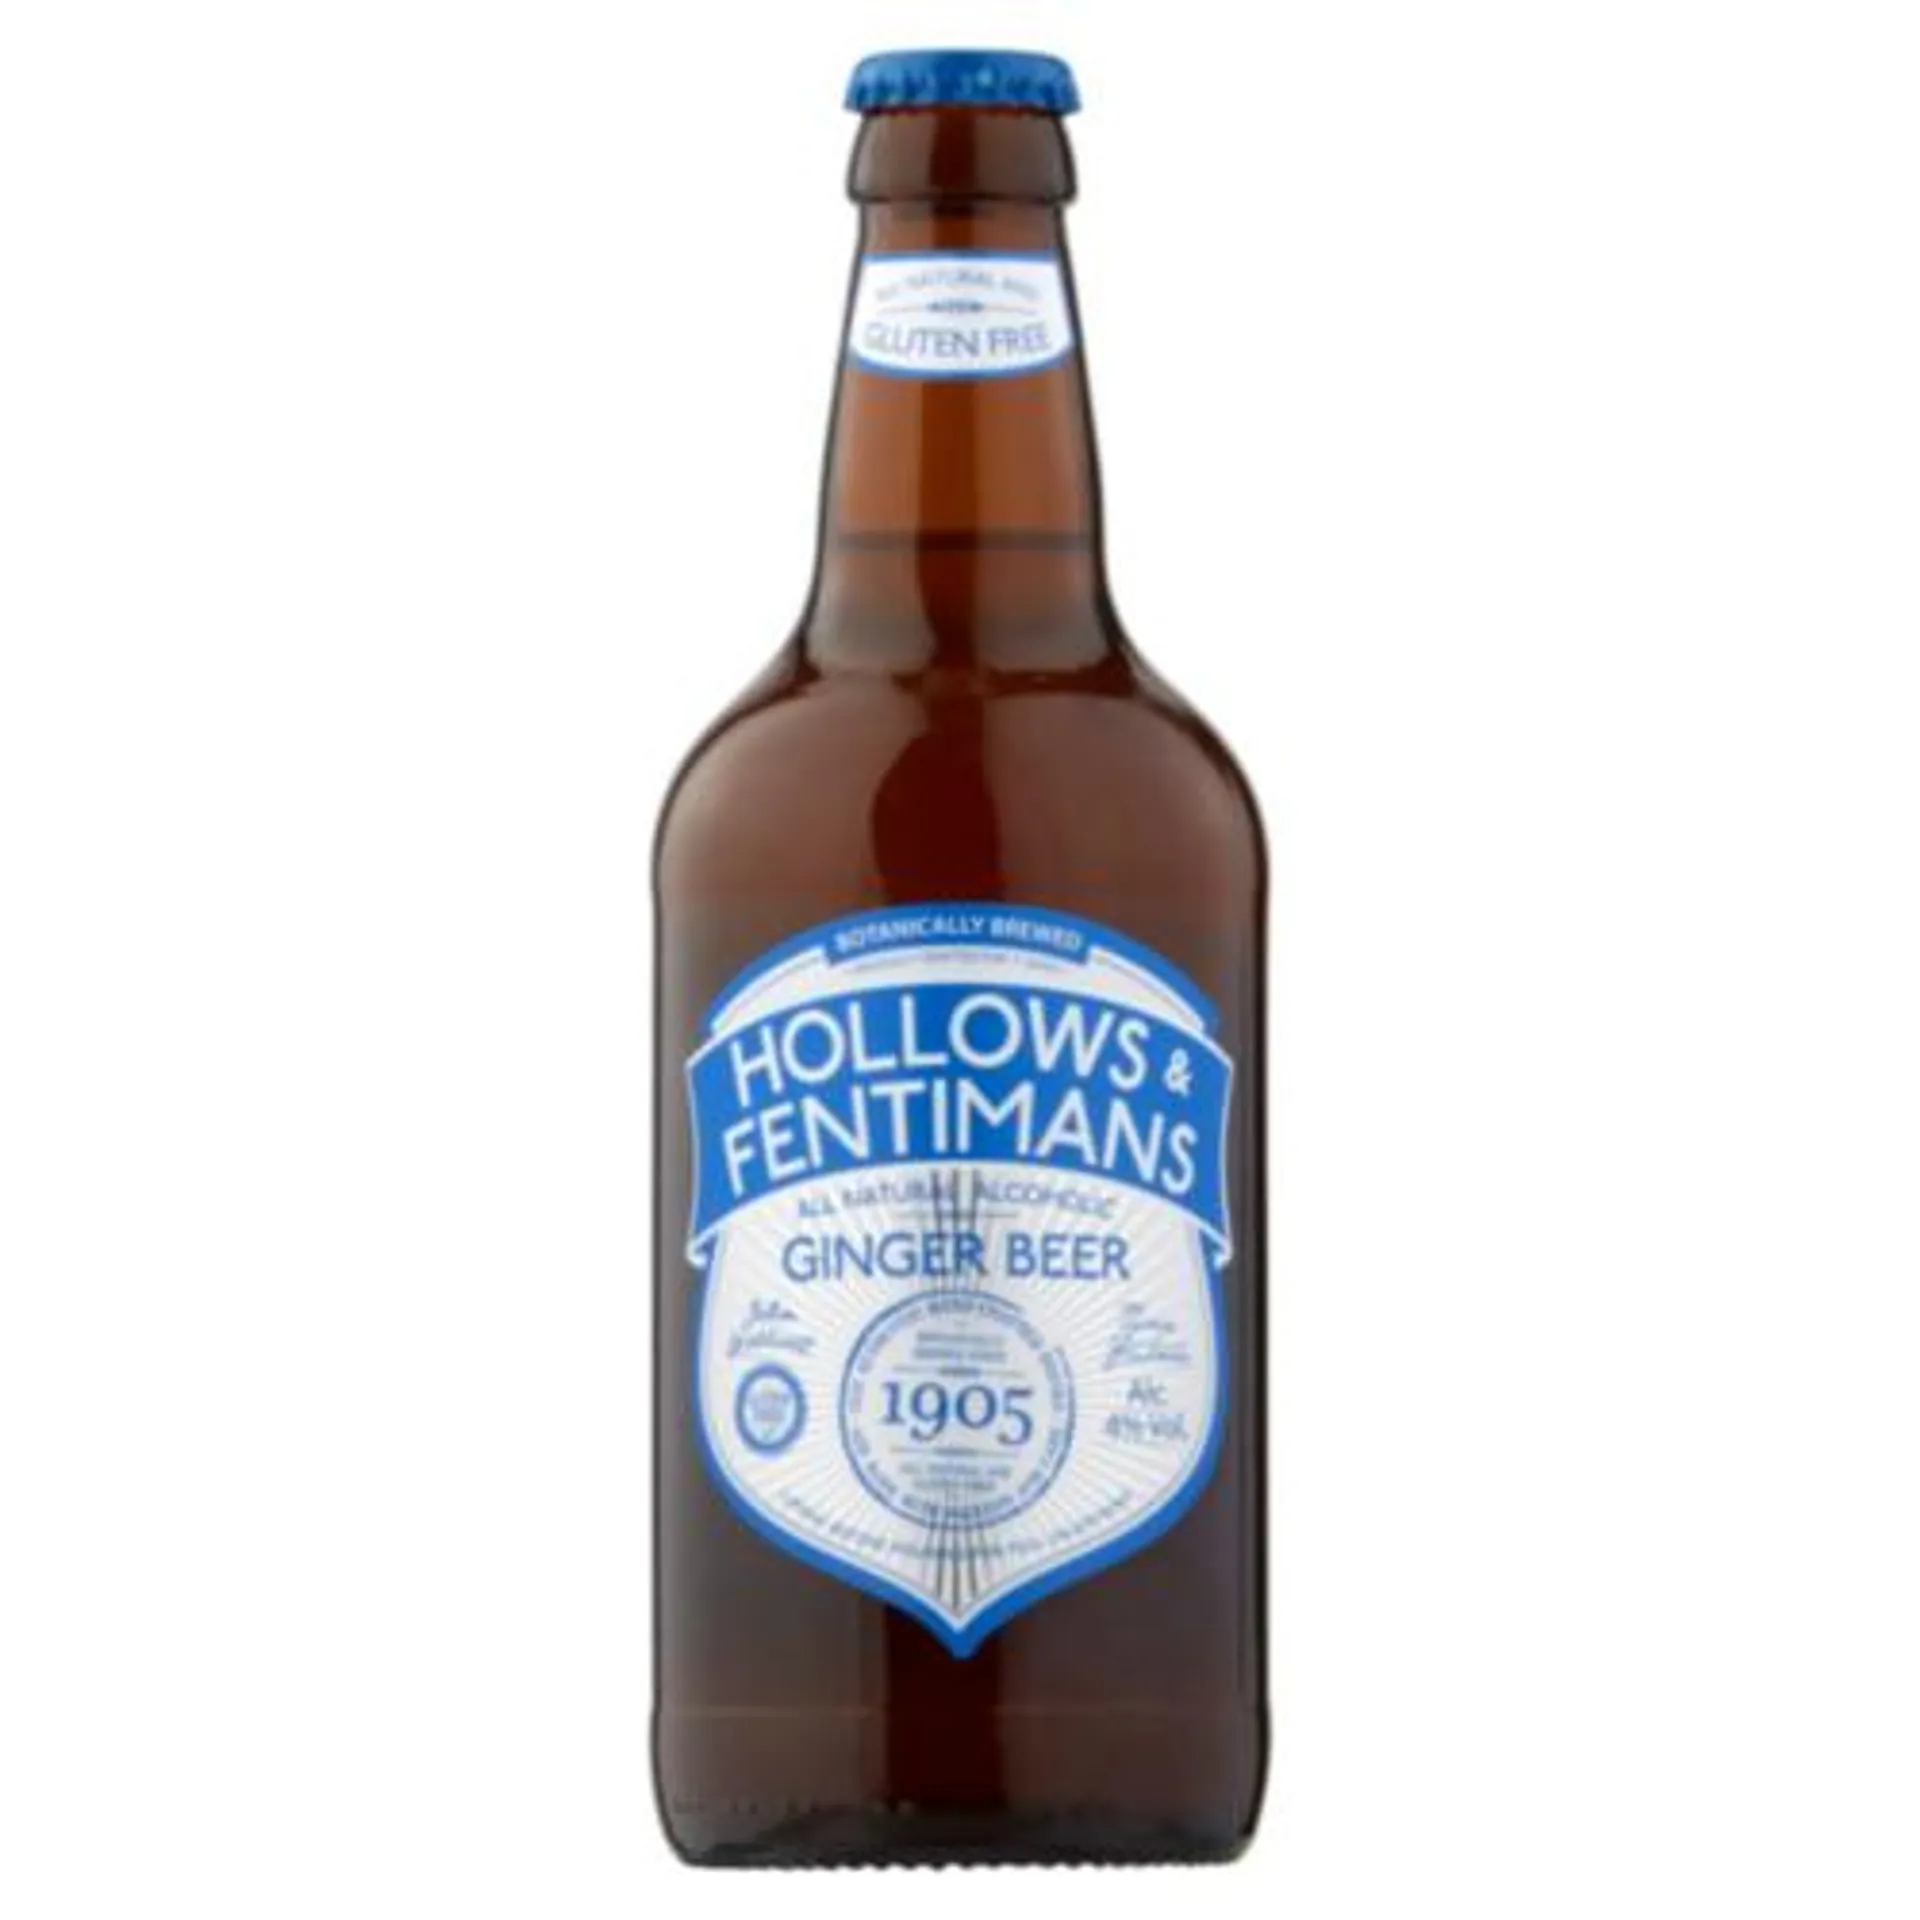 Hallows & Fentimans Alcoholic Ginger Beer